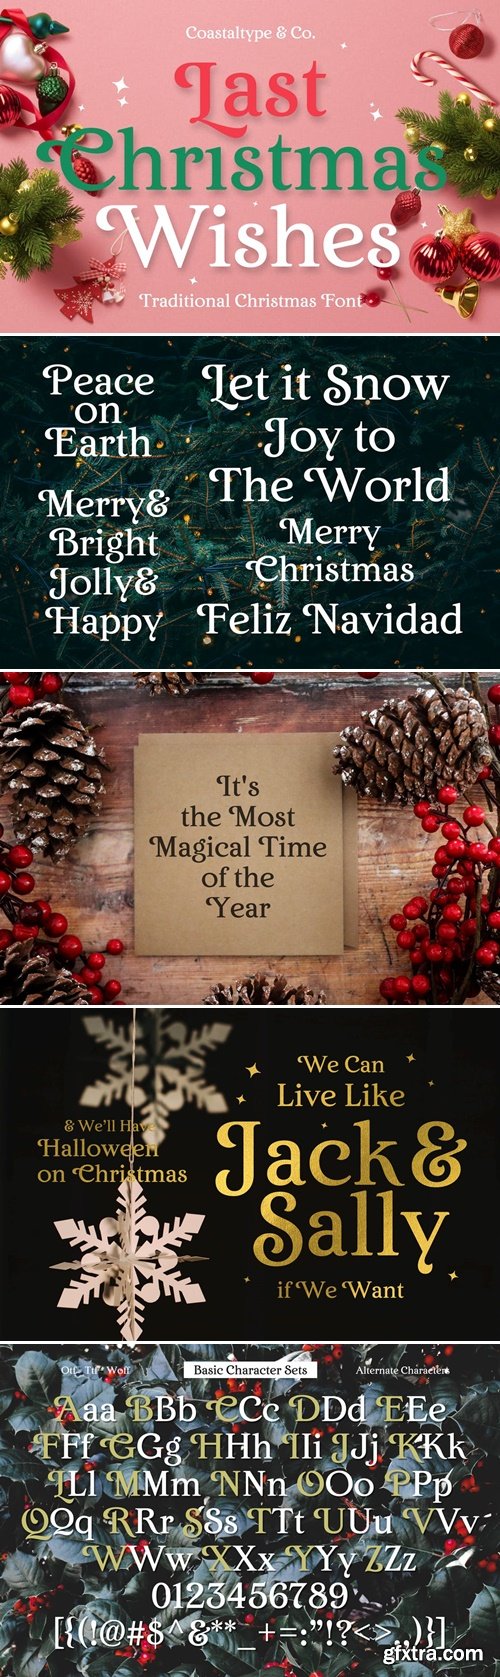 Last Christmas Wishes Font